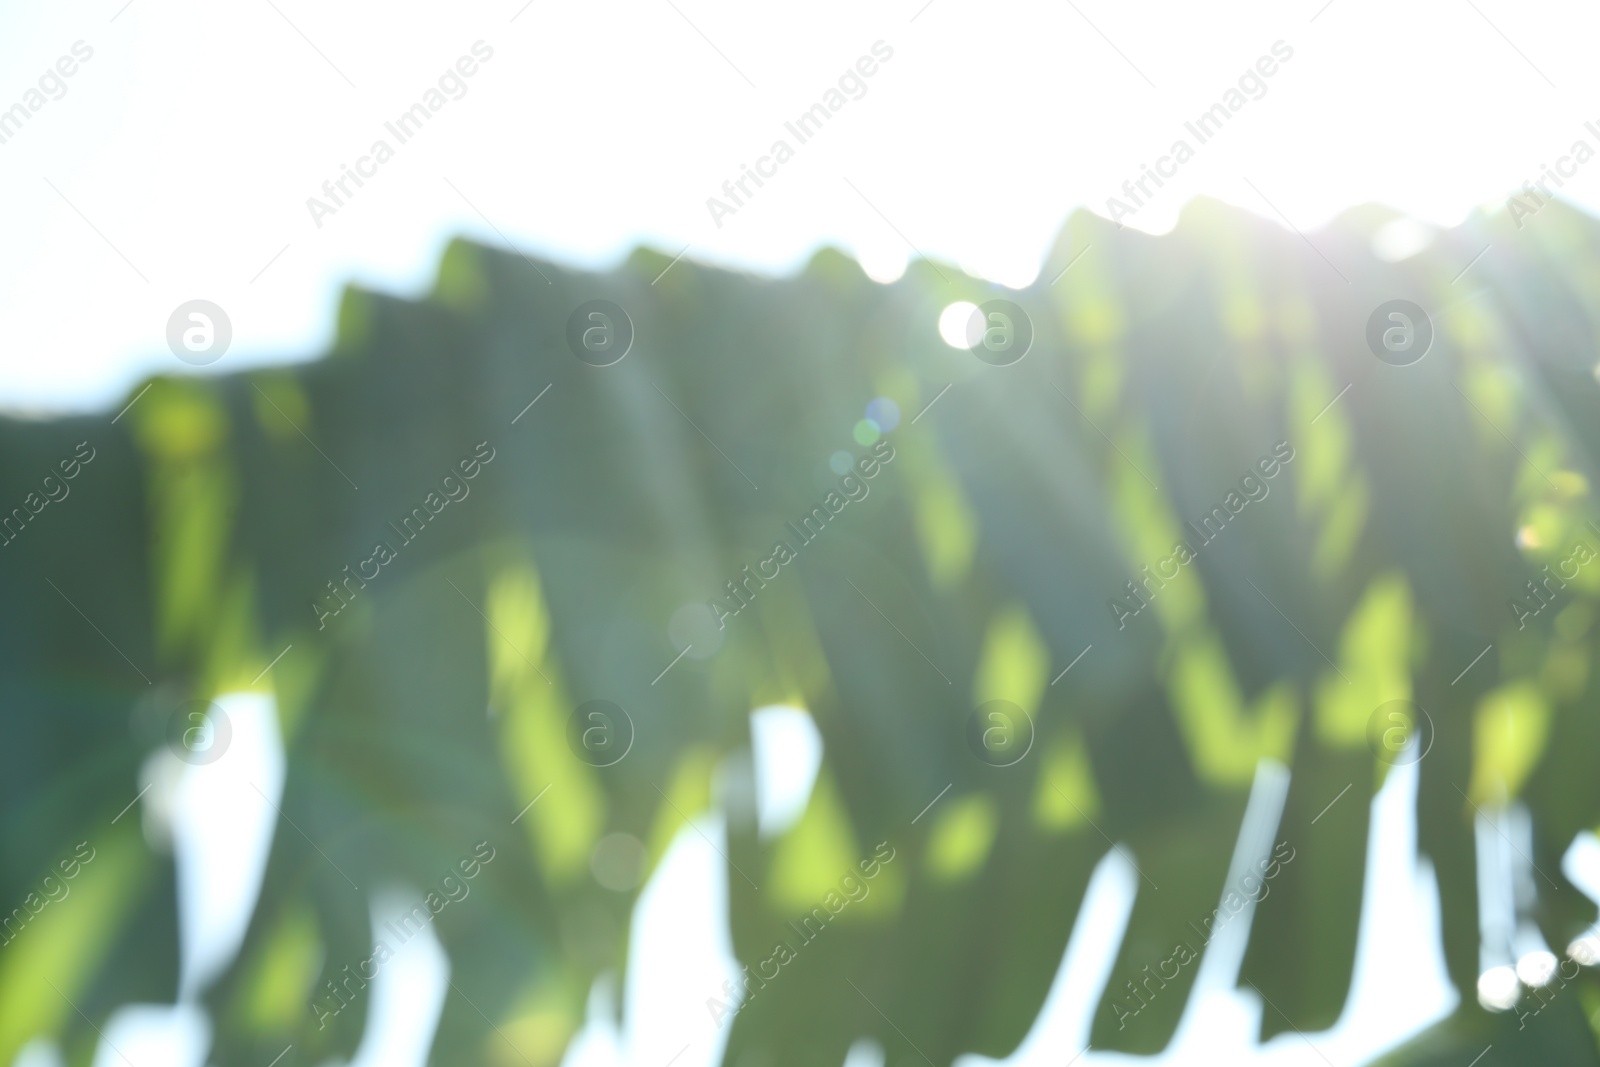 Photo of Blurred view of palm tree with lush green leaves